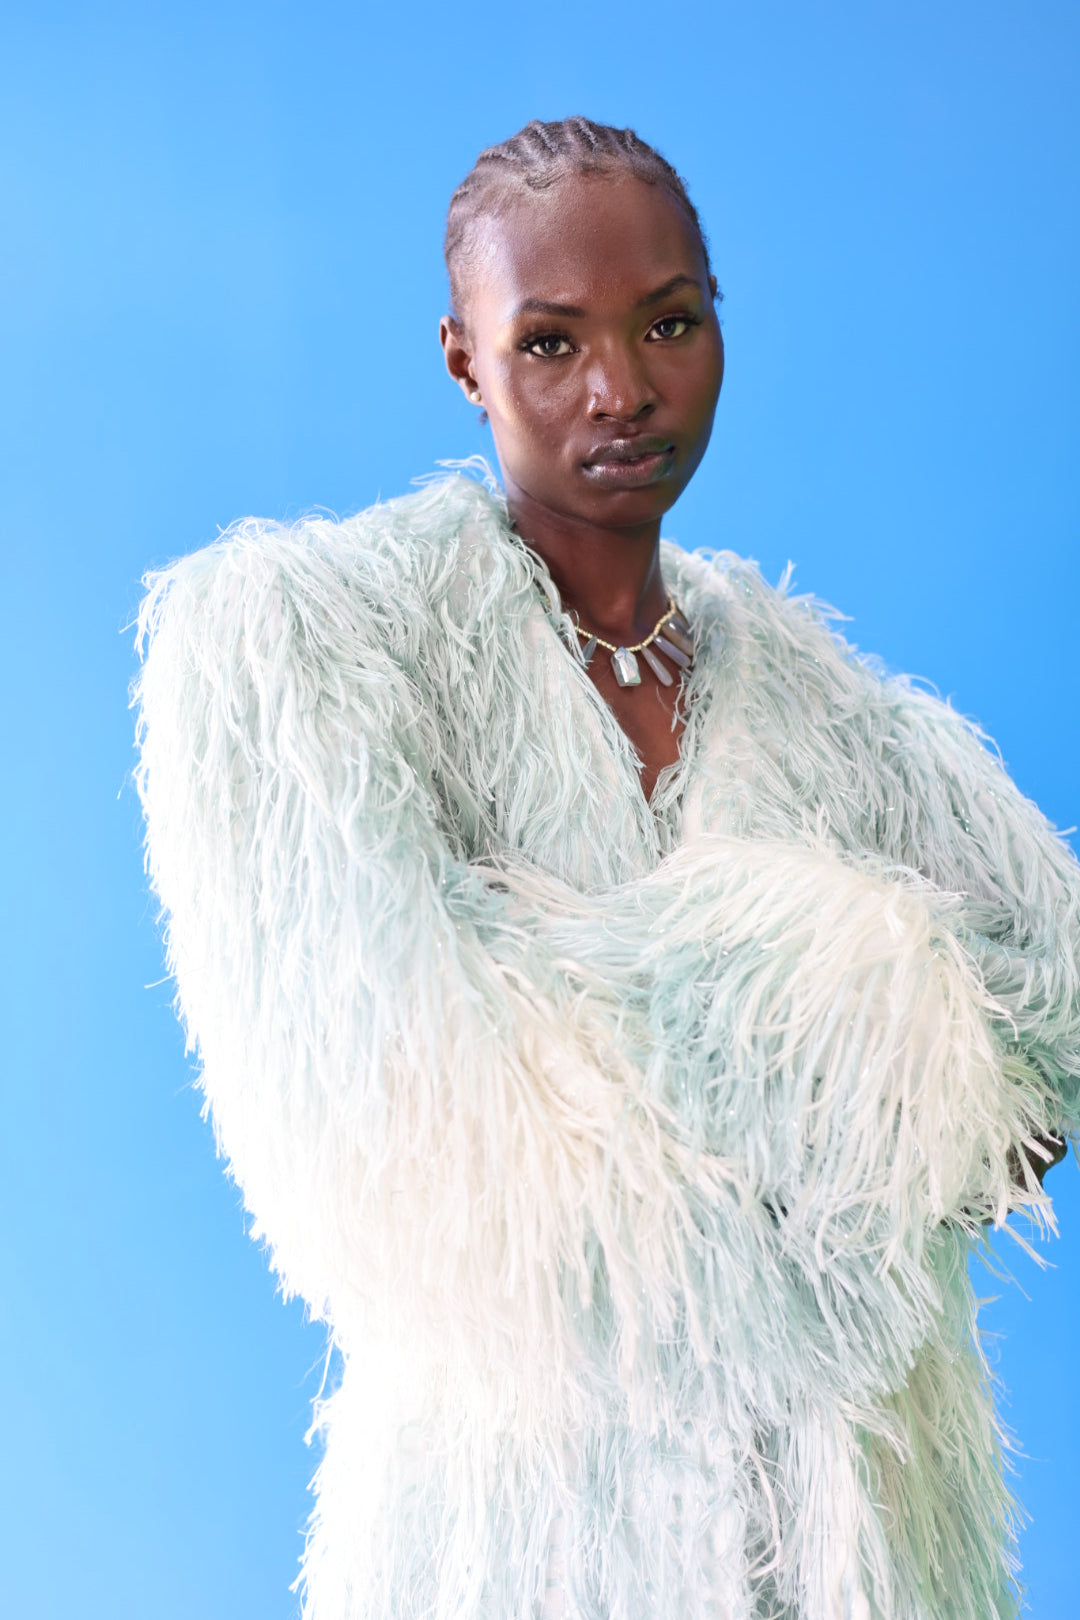 The Enola Shaggy Coat has an ombre effect from light blue to creamy white. Personalize this coat by tying it however you want and styling it with your favorite jewelry.